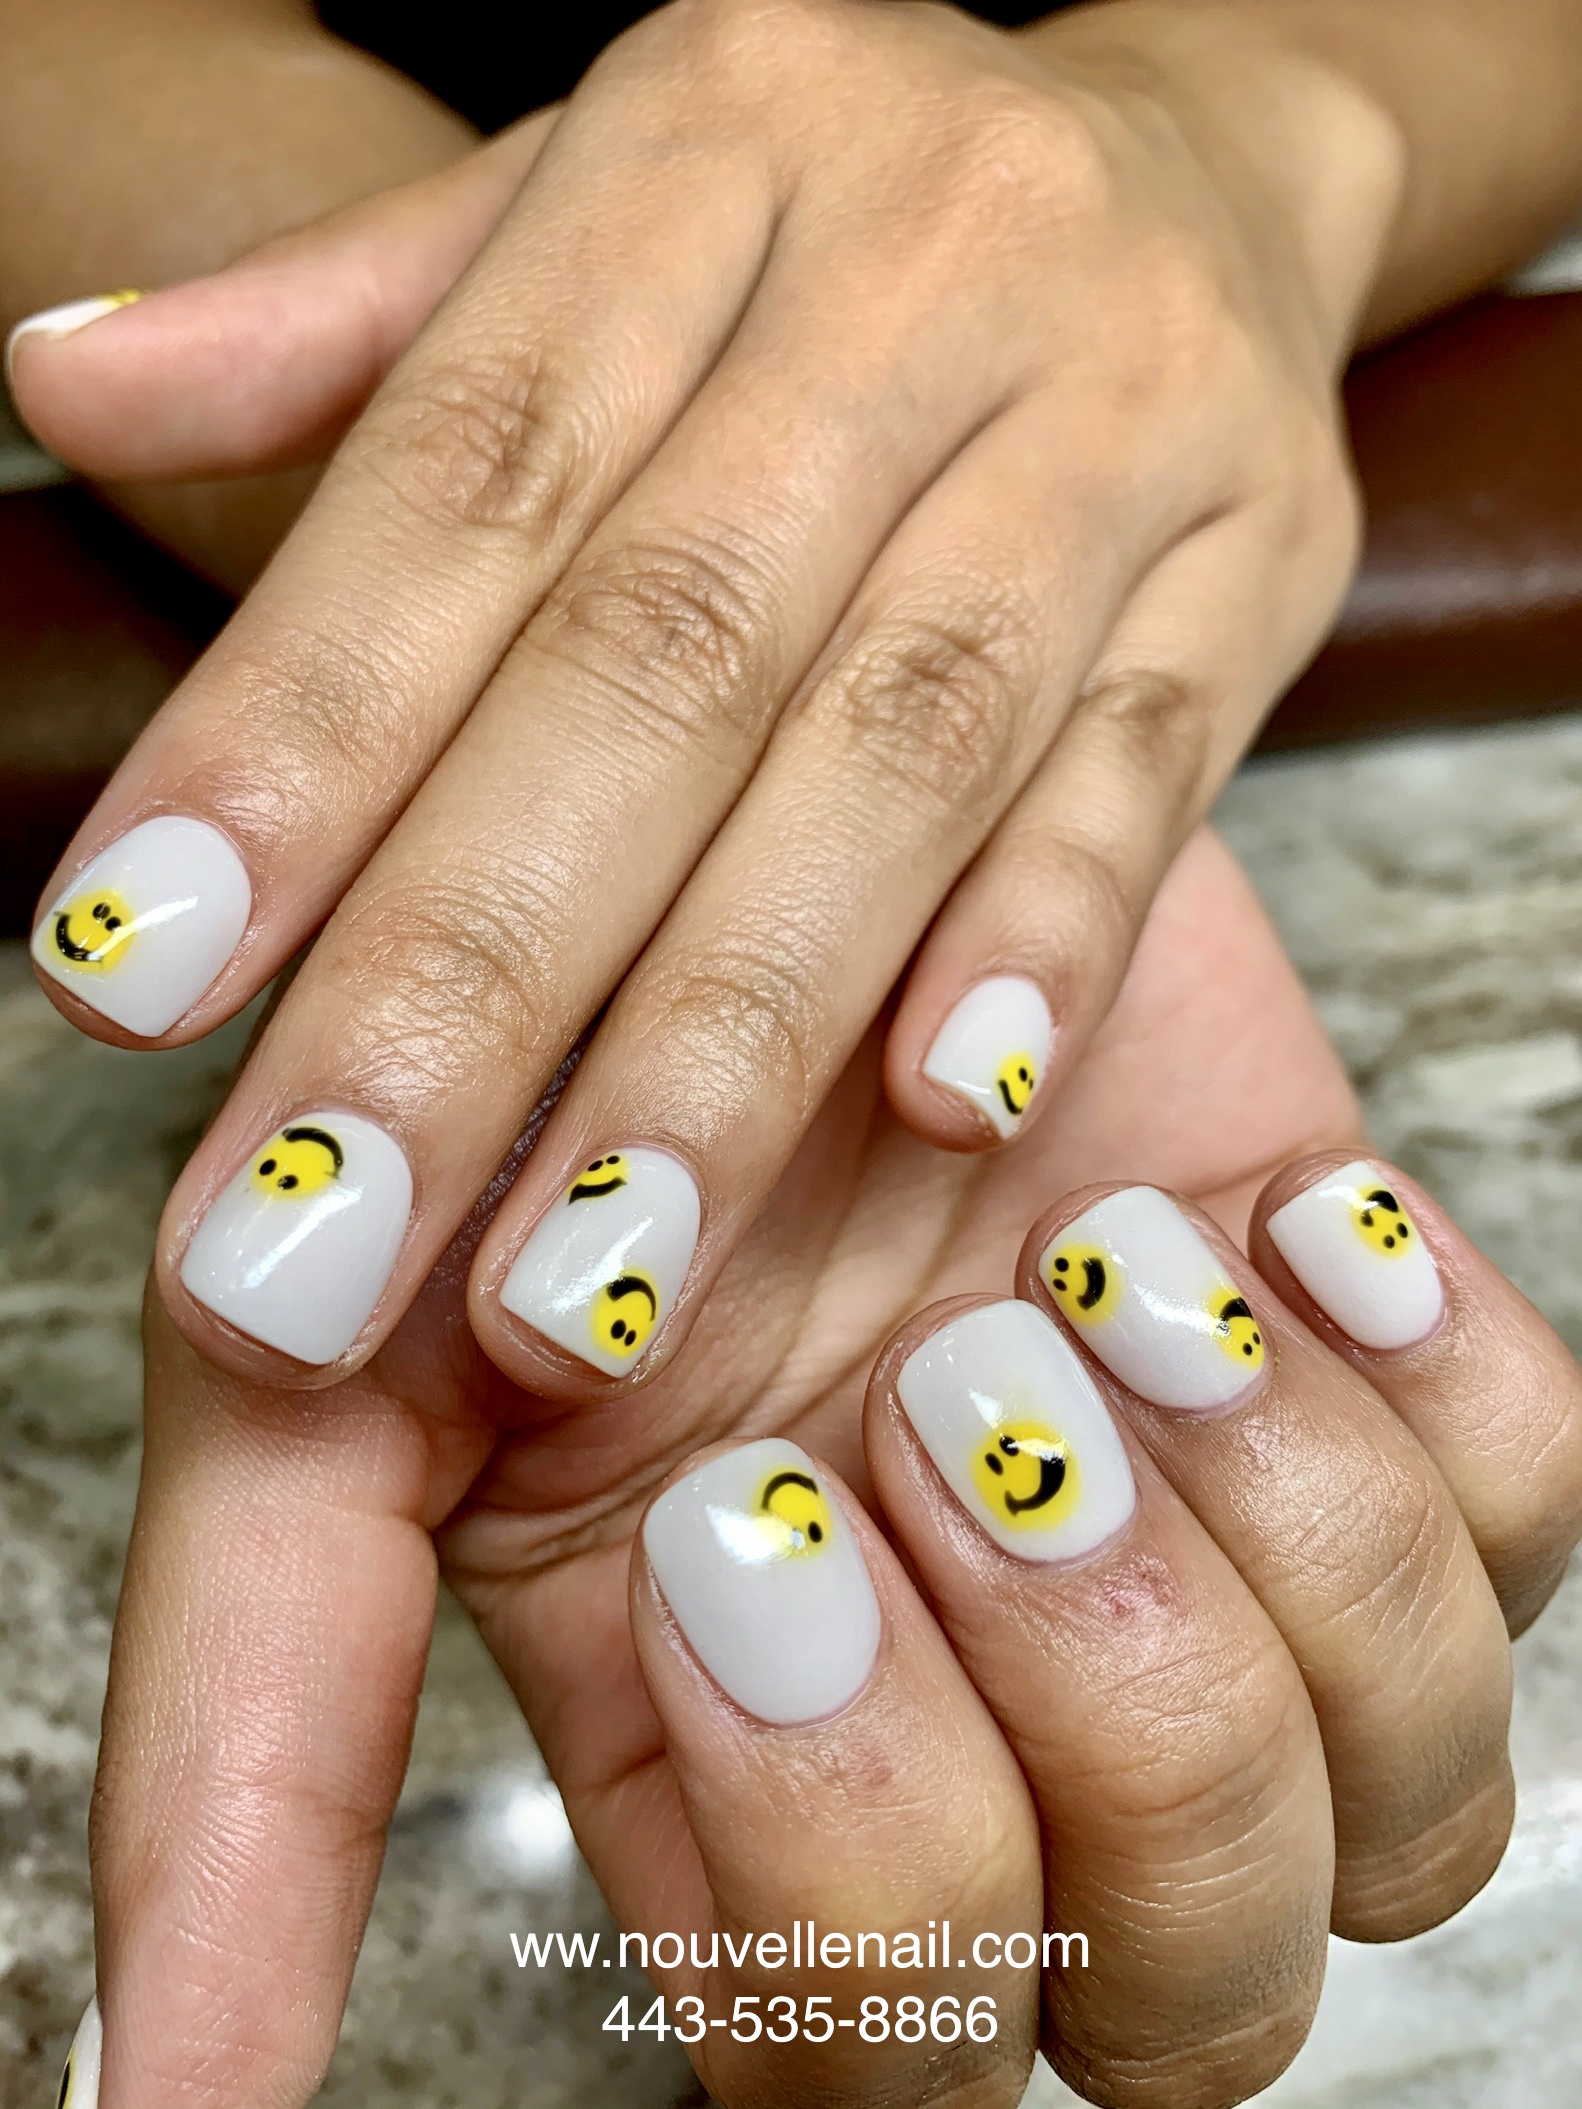 white dipping powder nails with smile face